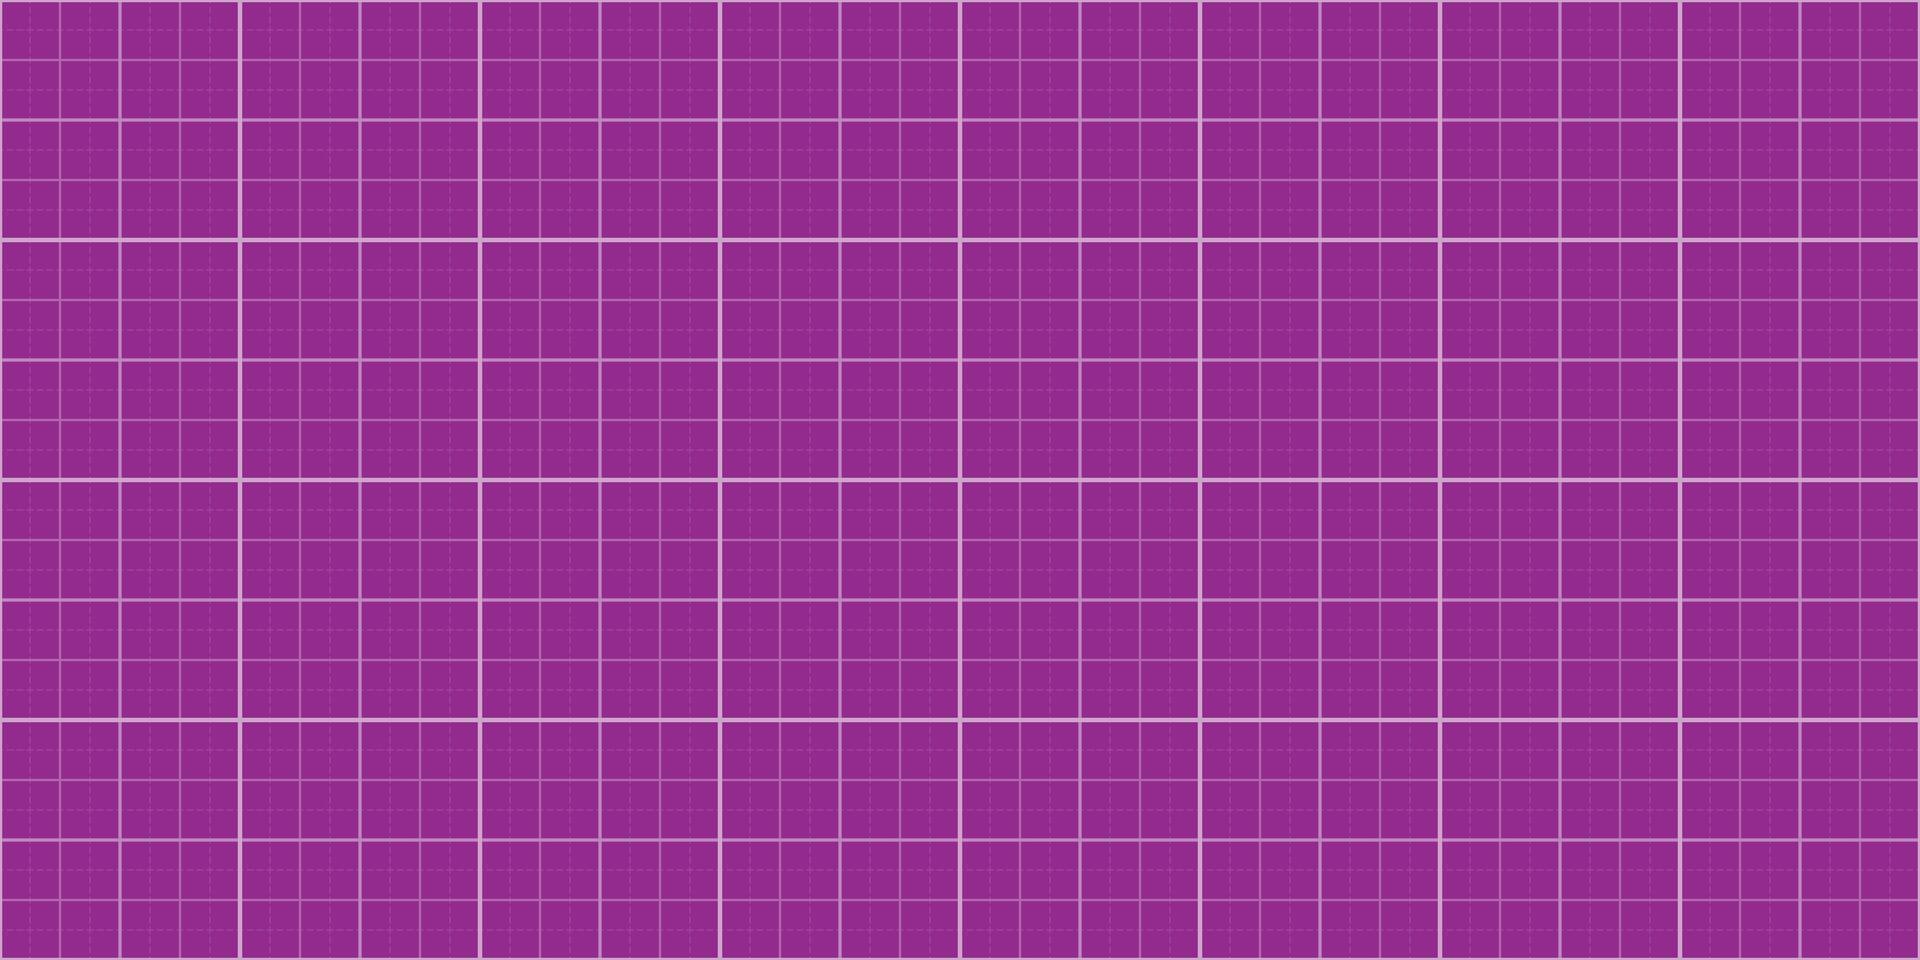 Light Purple Blank Horizontal Vector Background With Seamless Square Grid Pattern